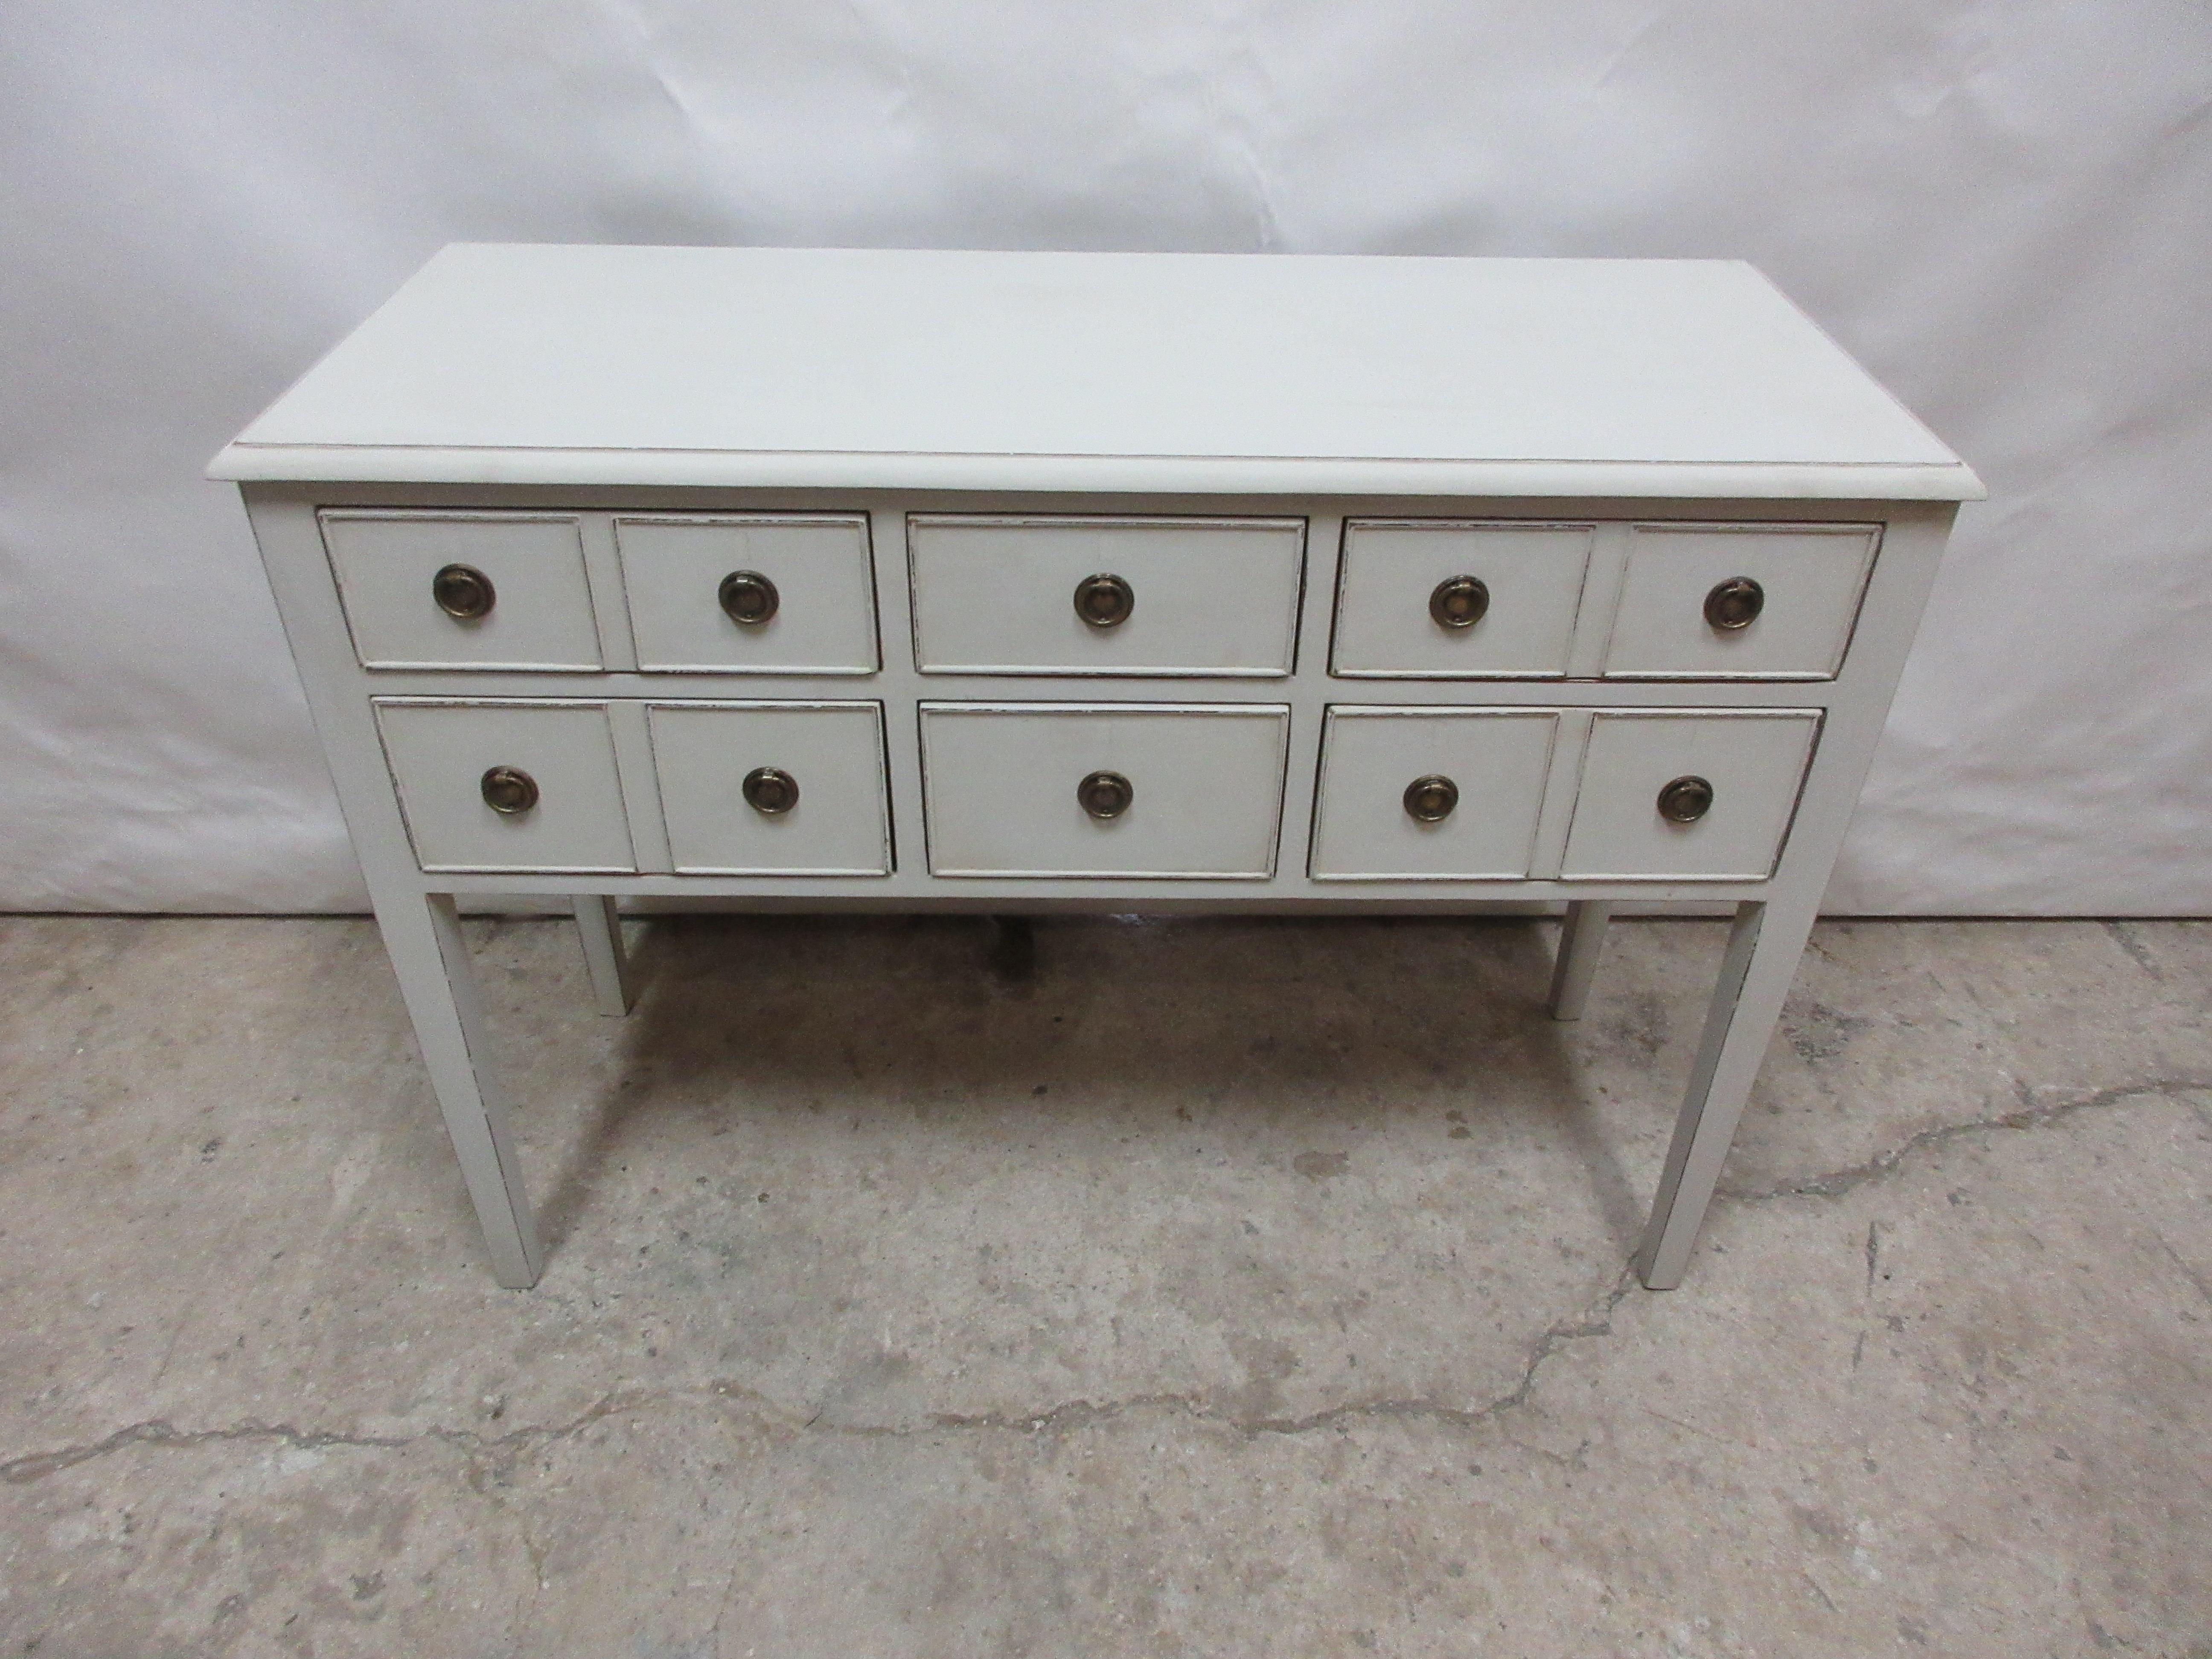 This is a 6 Drawer Console Table, the 2 drawers on the right and left side have 2 handles but only 1 drawer. its been restored and repainted with Milk Paints 